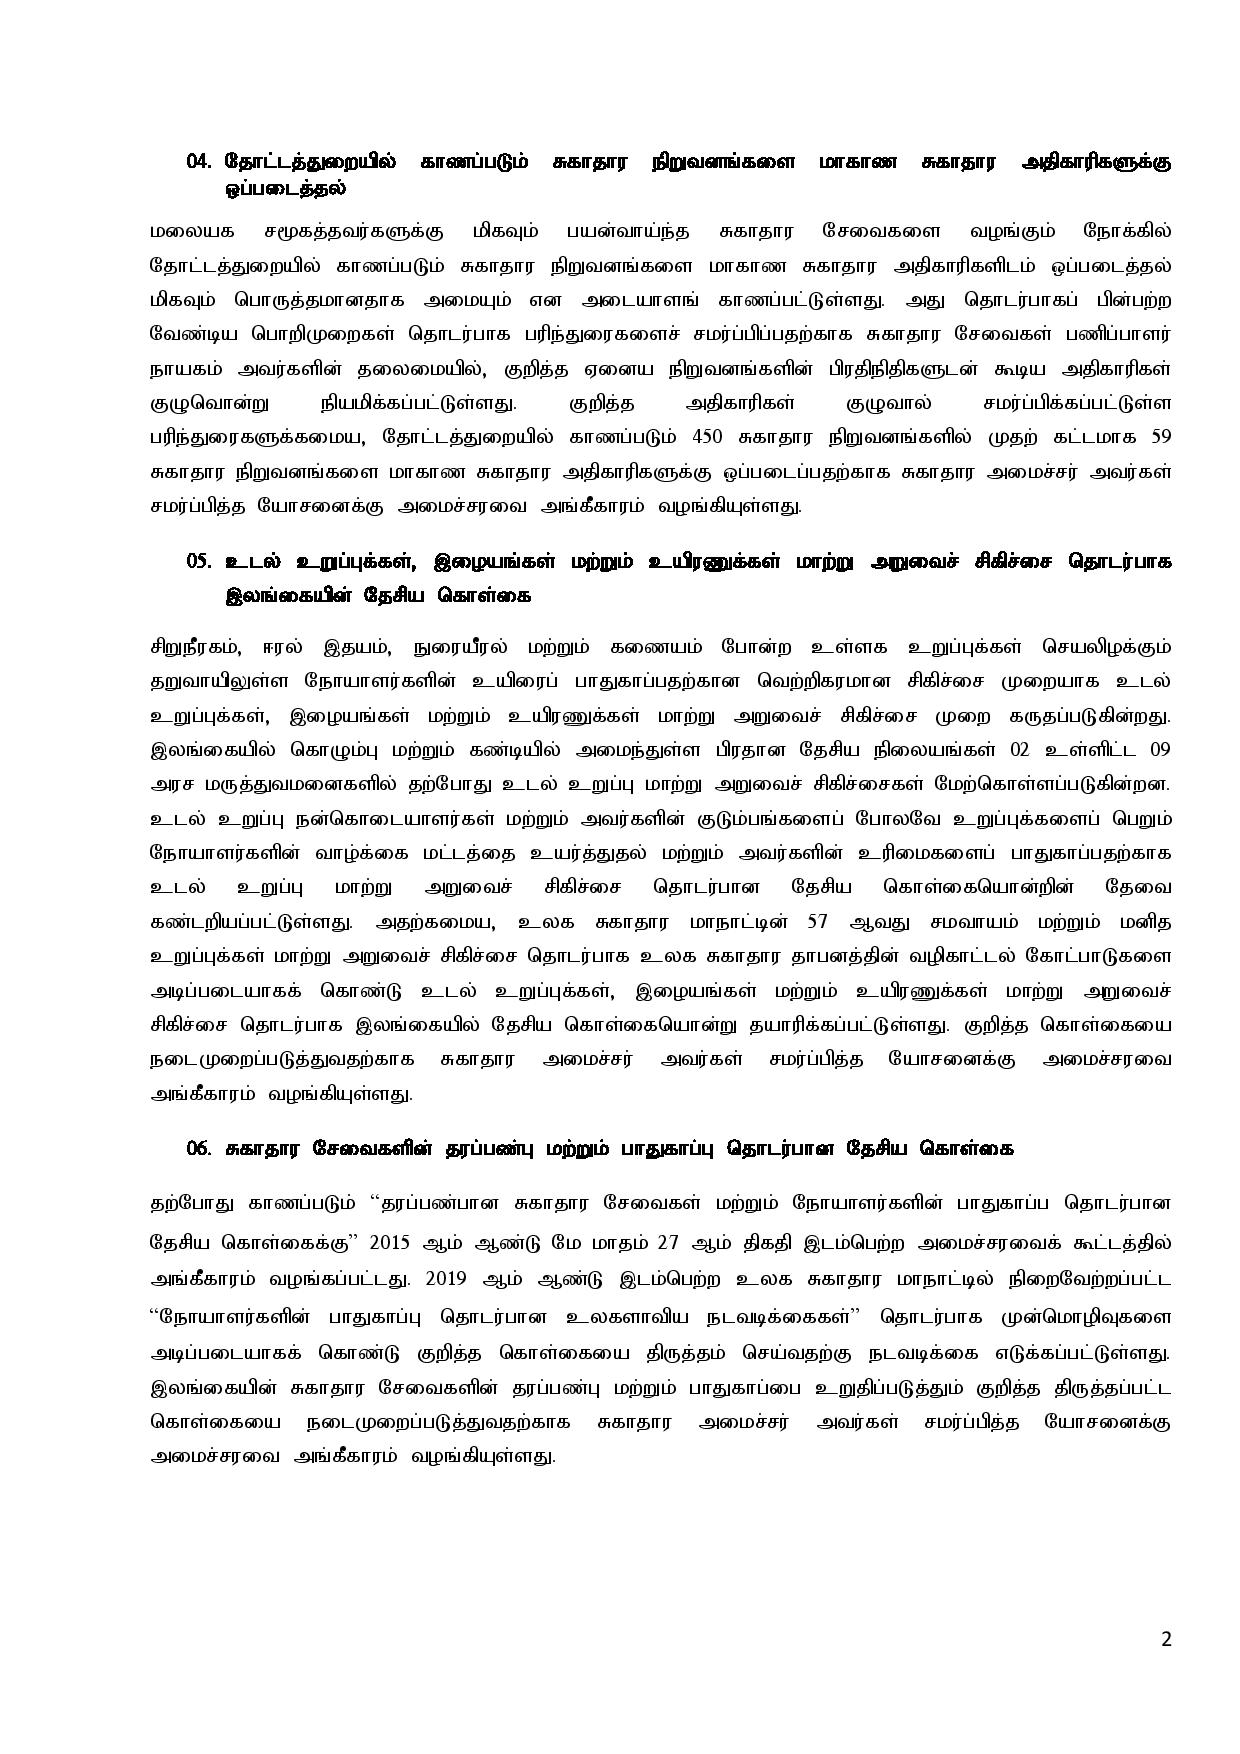 Cabinet Decisions on 24.01.2022 Tamil page 002